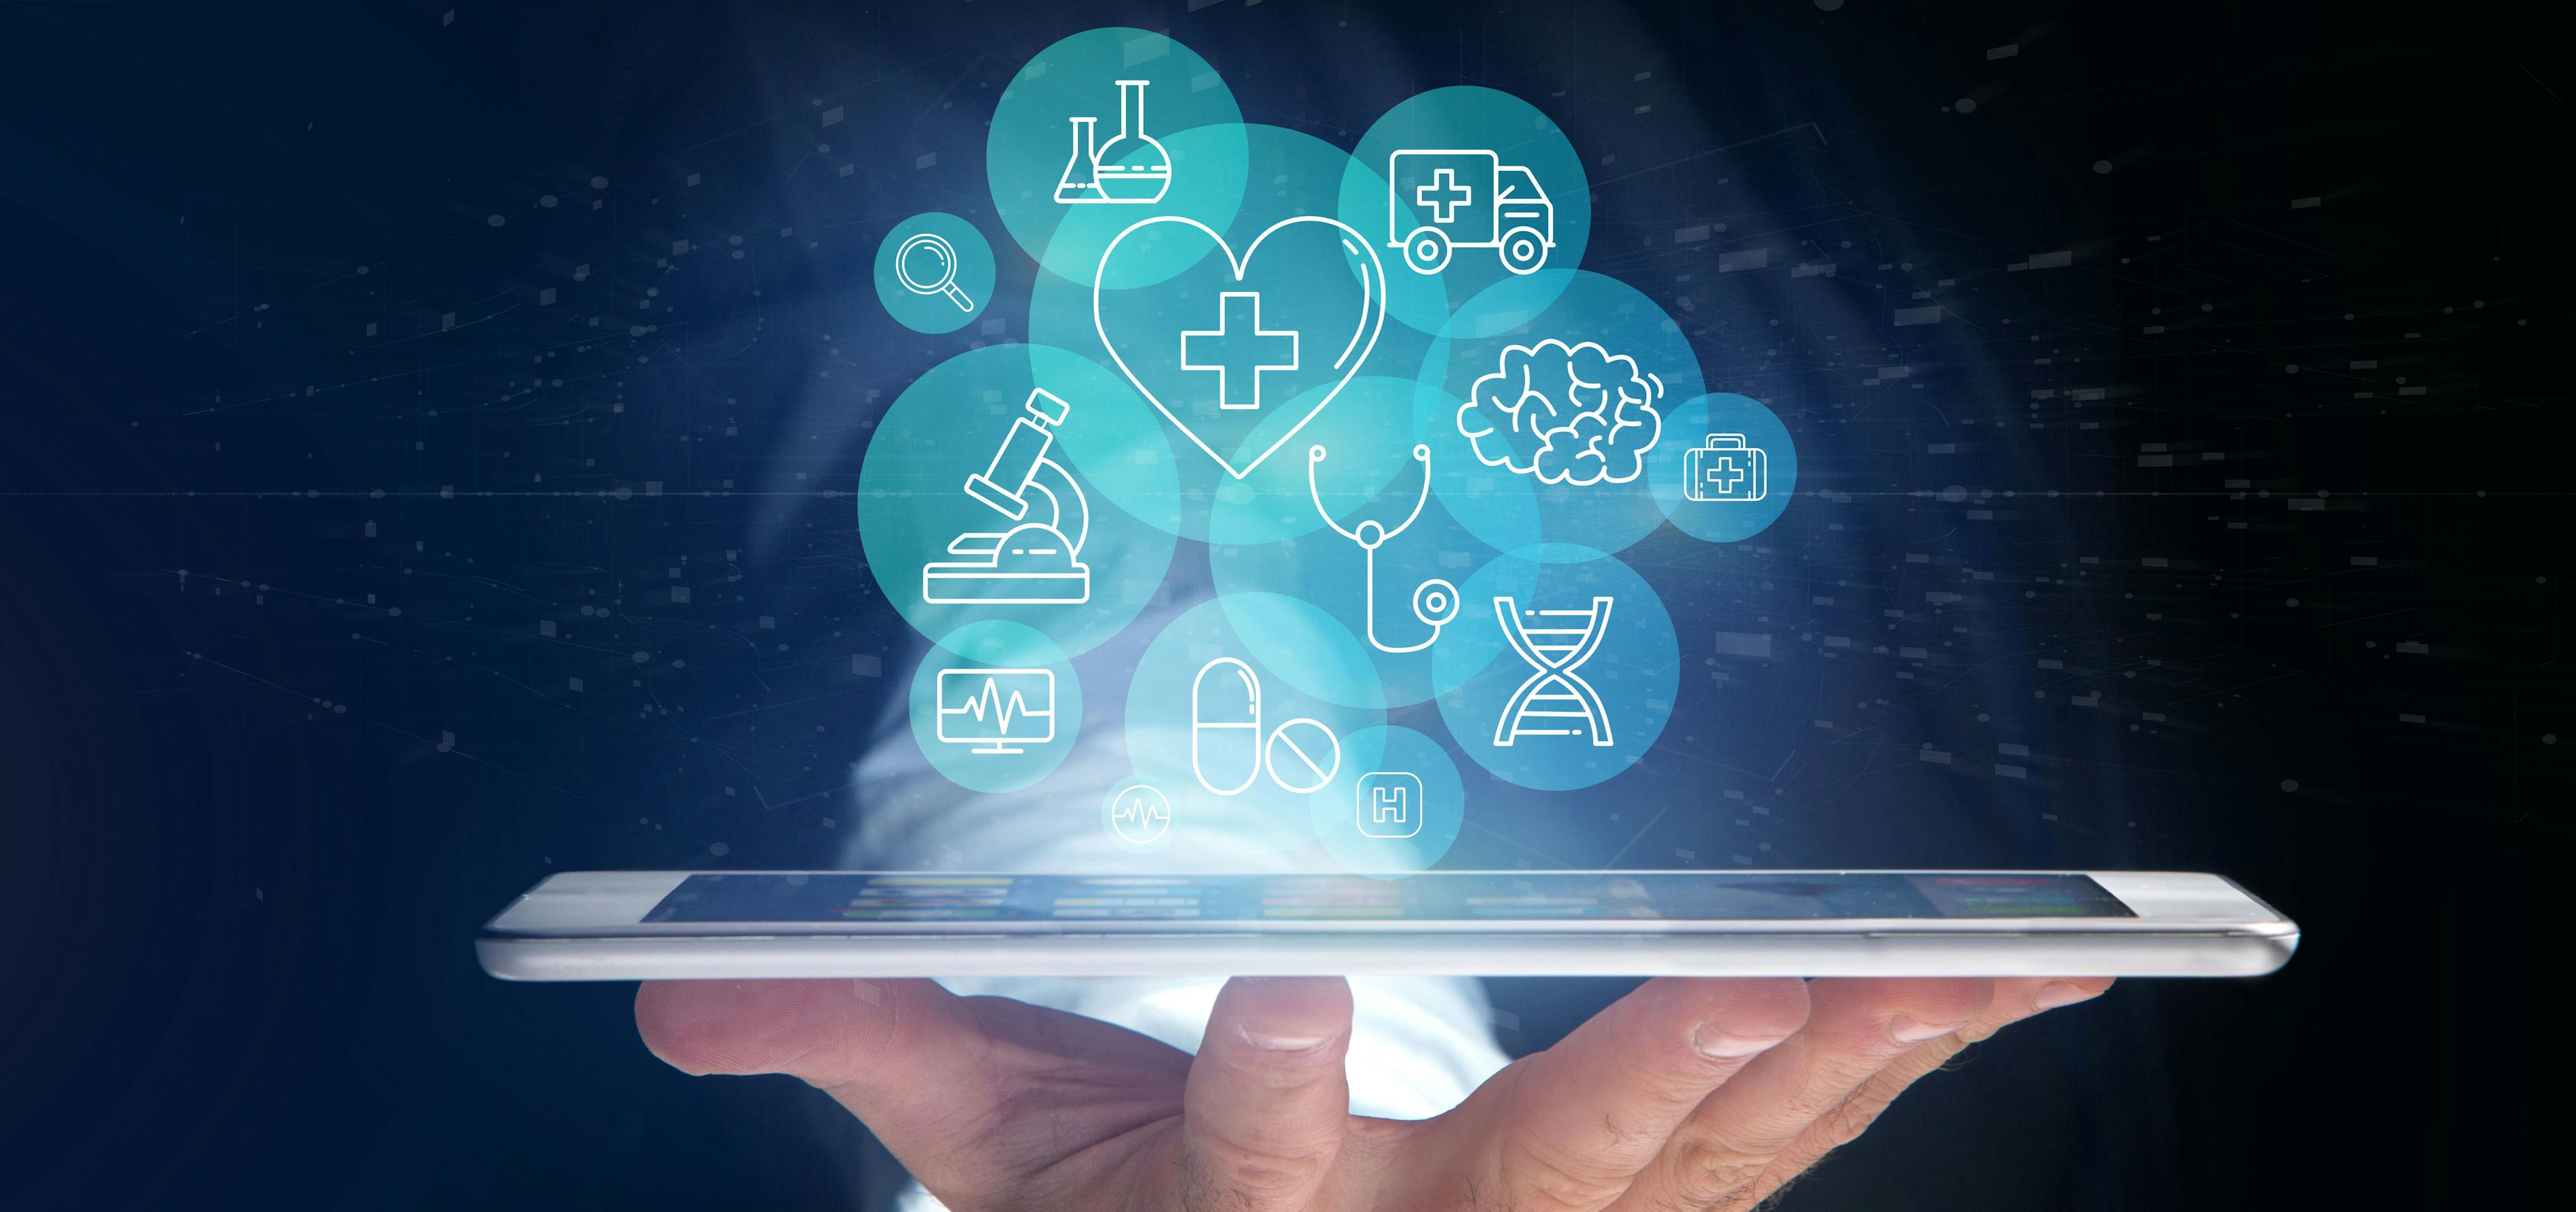 Person holding tablet with health care icons / Production Perig - stock.adobe.com